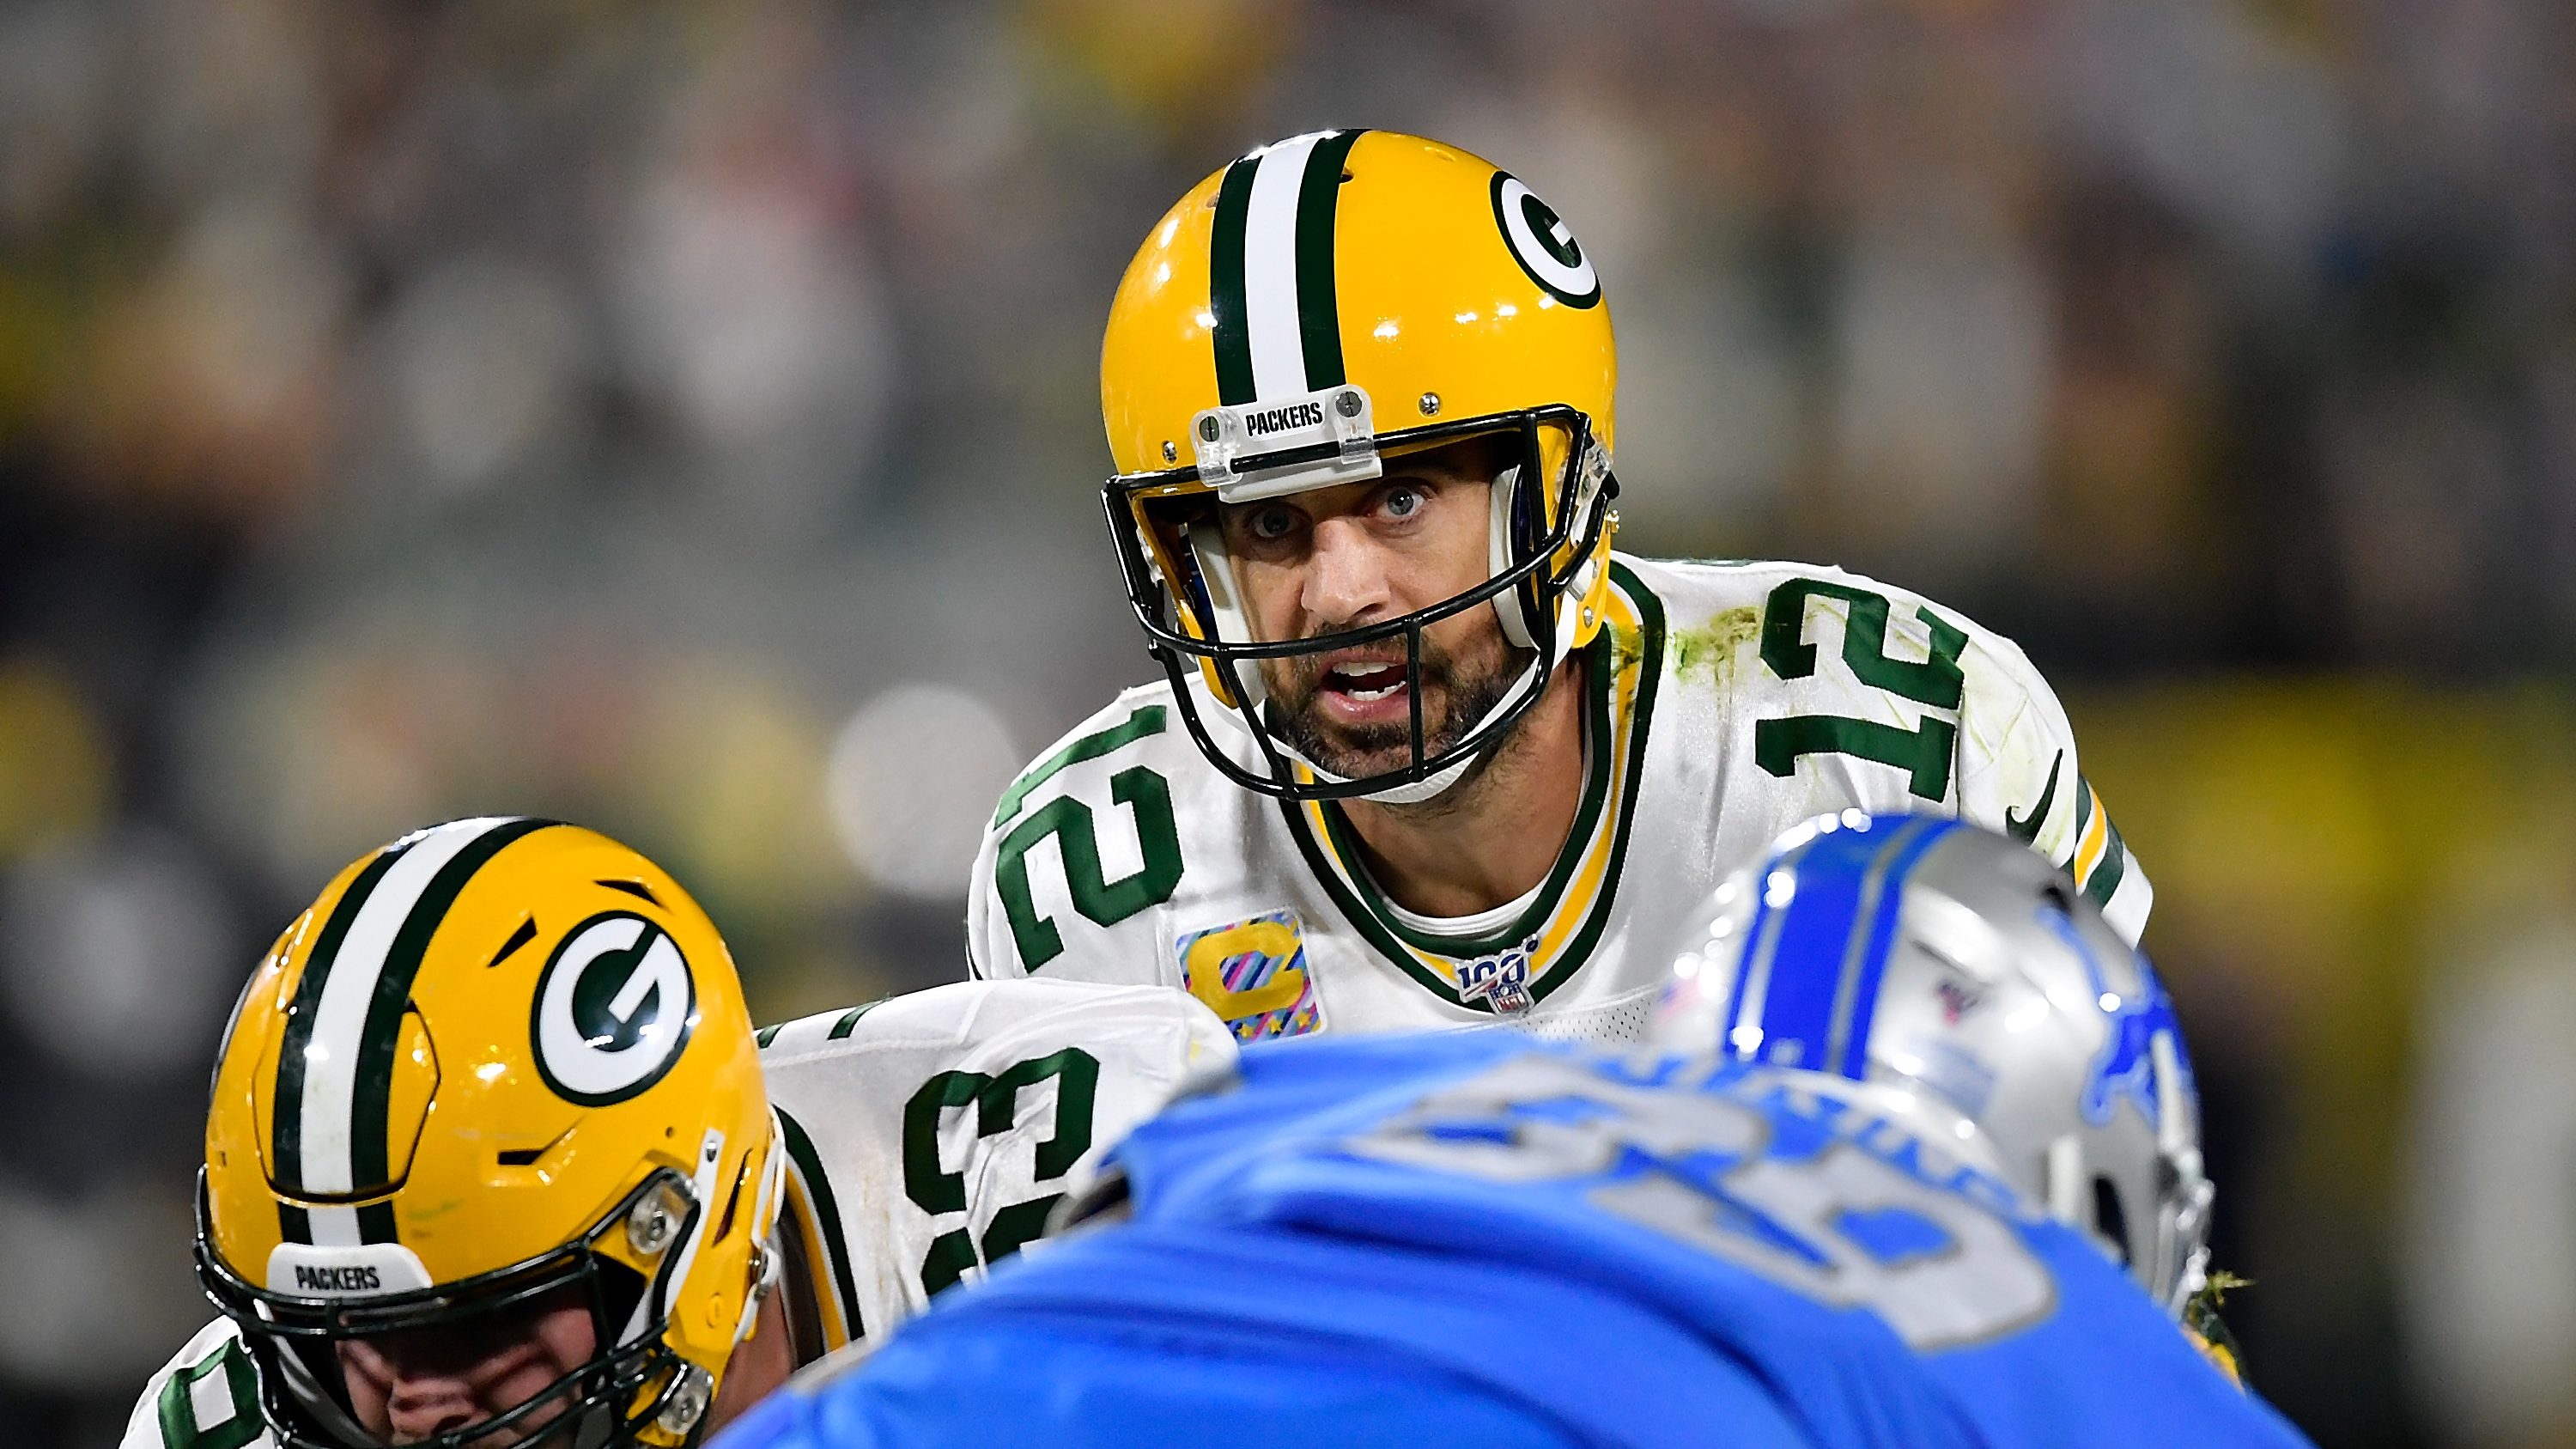 Packers vs Lions Live Stream How to Watch Without Cable